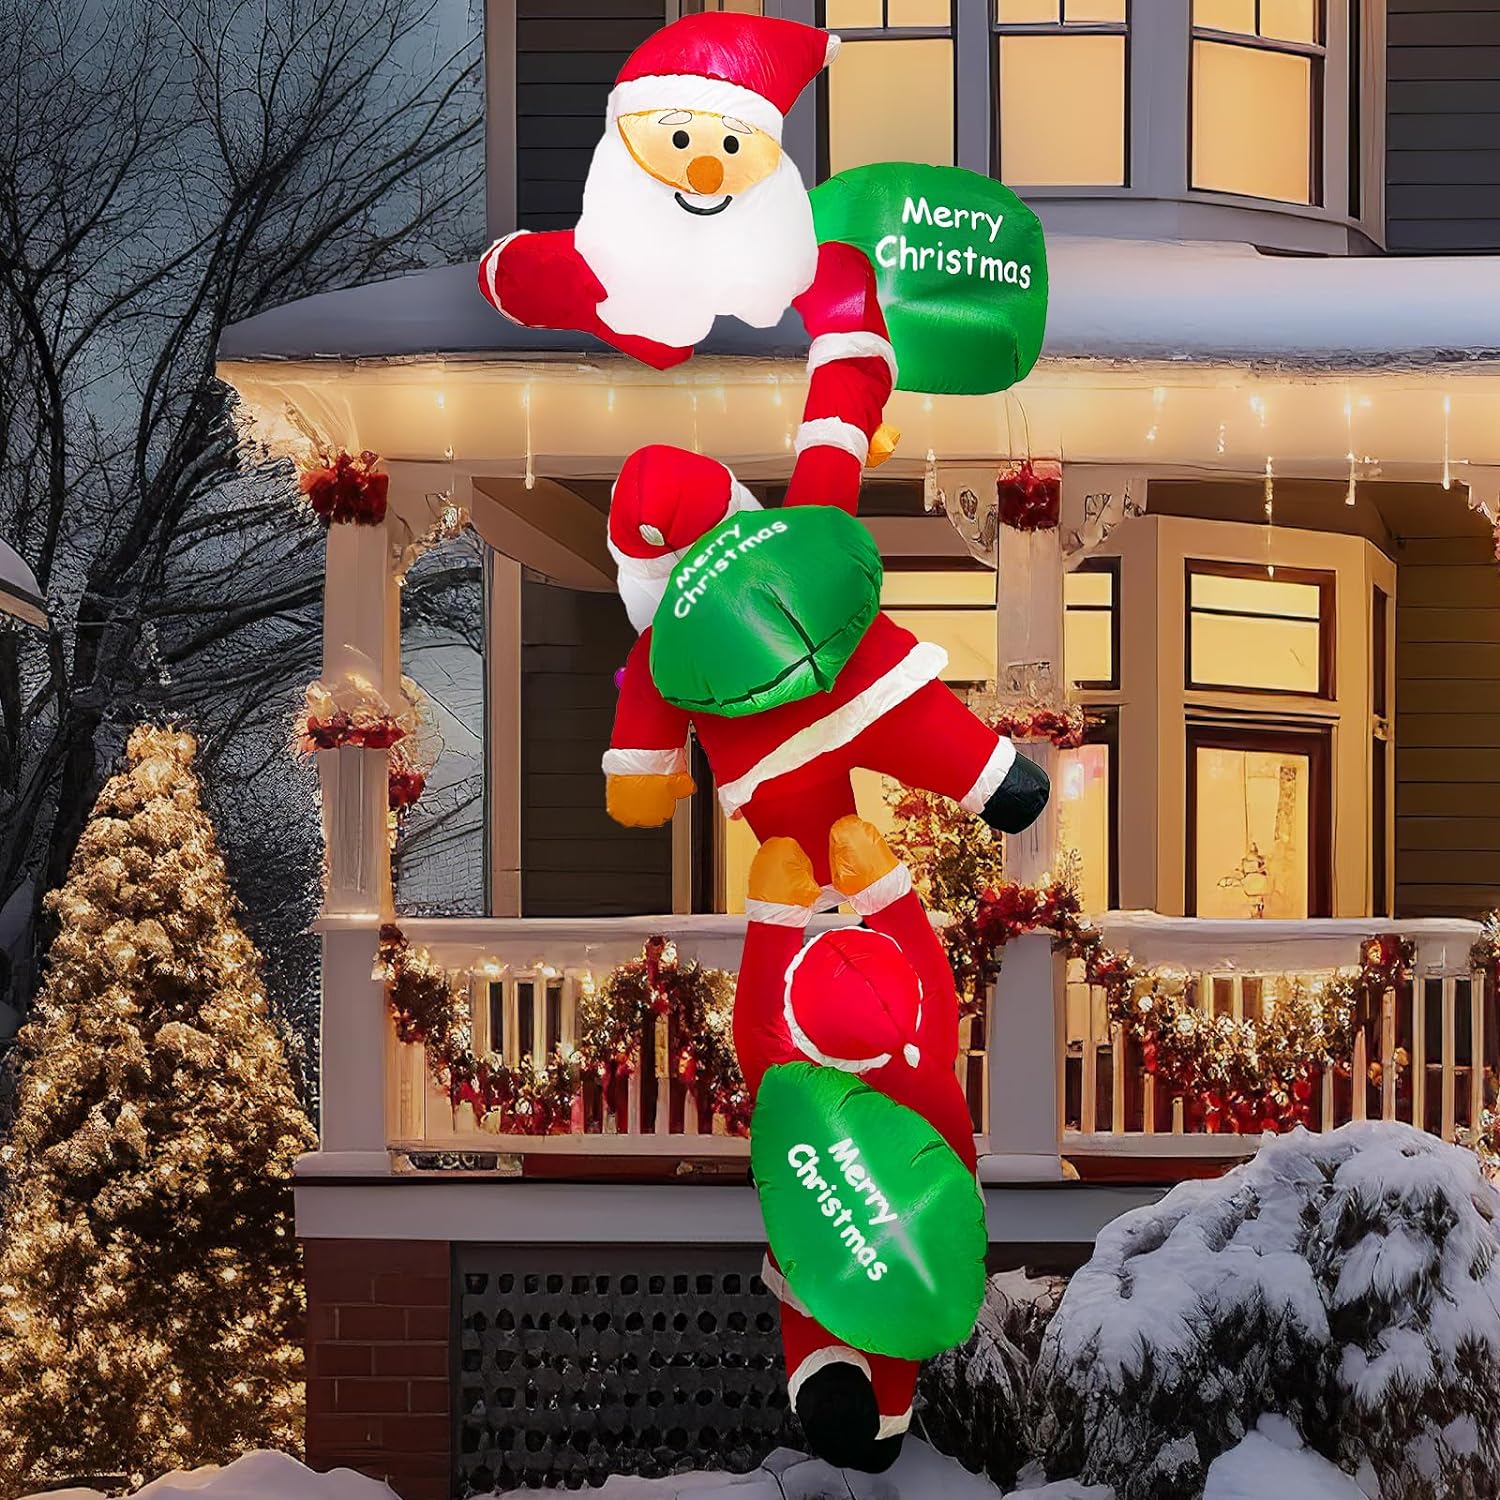 Fayavoo 8FT Christmas Inflatables Outdoor Decorations, Christmas Climbing Santa Claus Inflatable with LED Lights, Christmas Blow Up Yard Decorations for Indoor Outdoor Christmas Garden Porch Decor